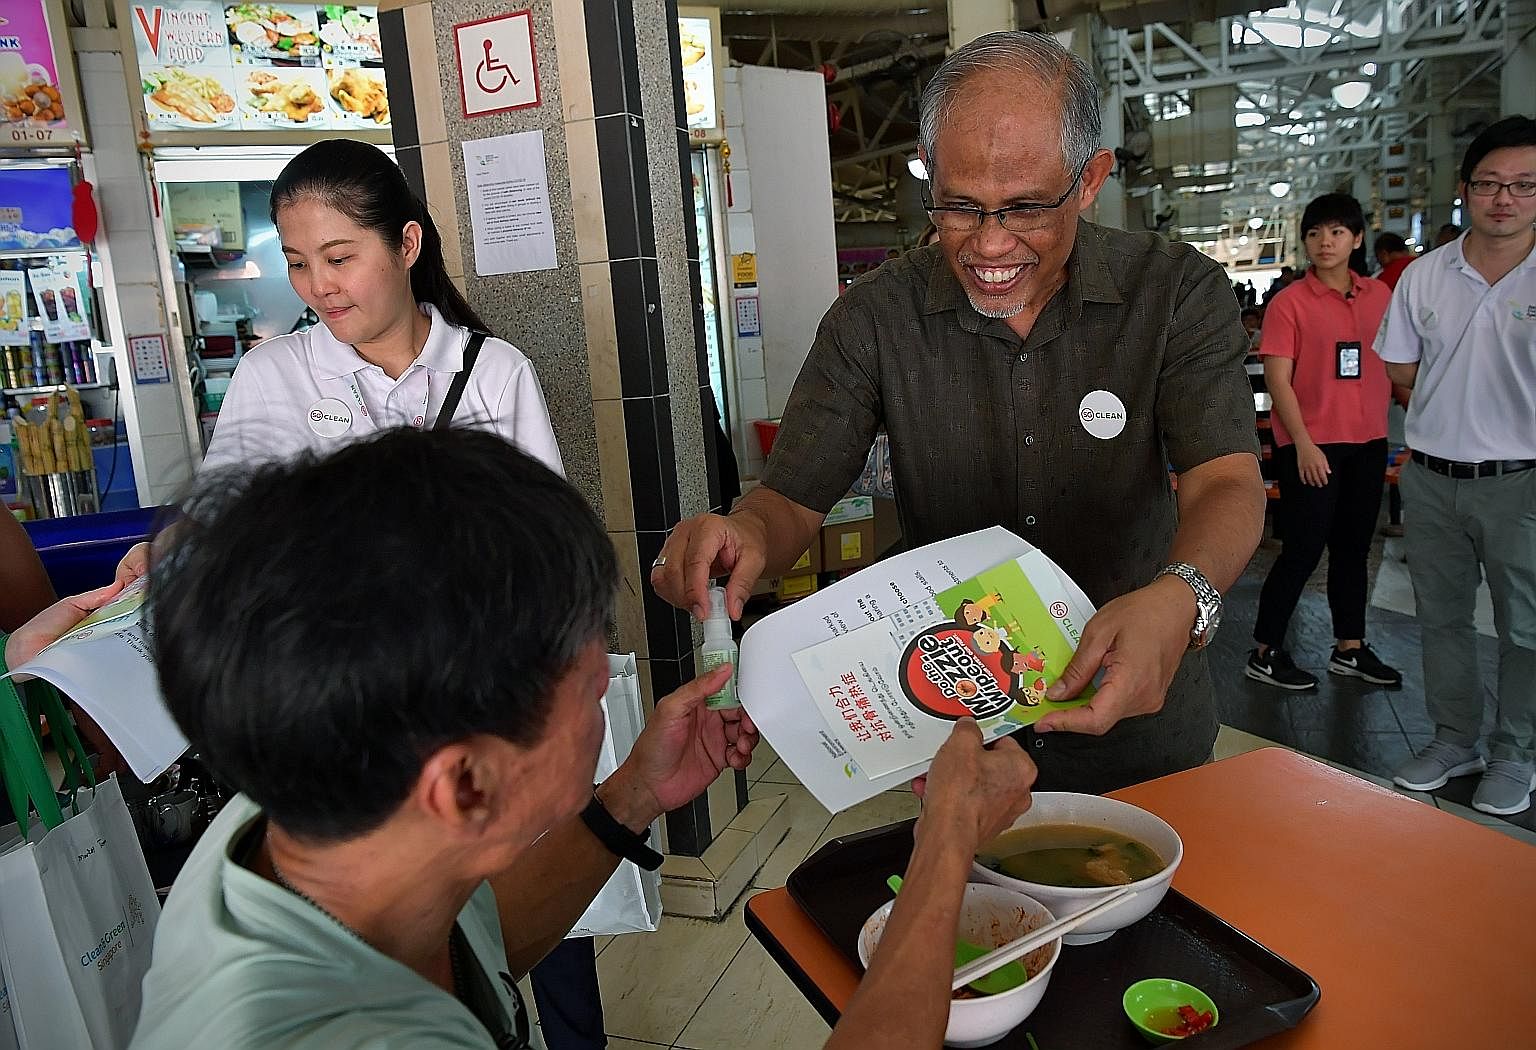 Environment and Water Resources Minister Masagos Zulkifli giving out mosquito repellents and information booklets at the launch of the National Dengue Prevention Campaign in Ang Mo Kio yesterday.